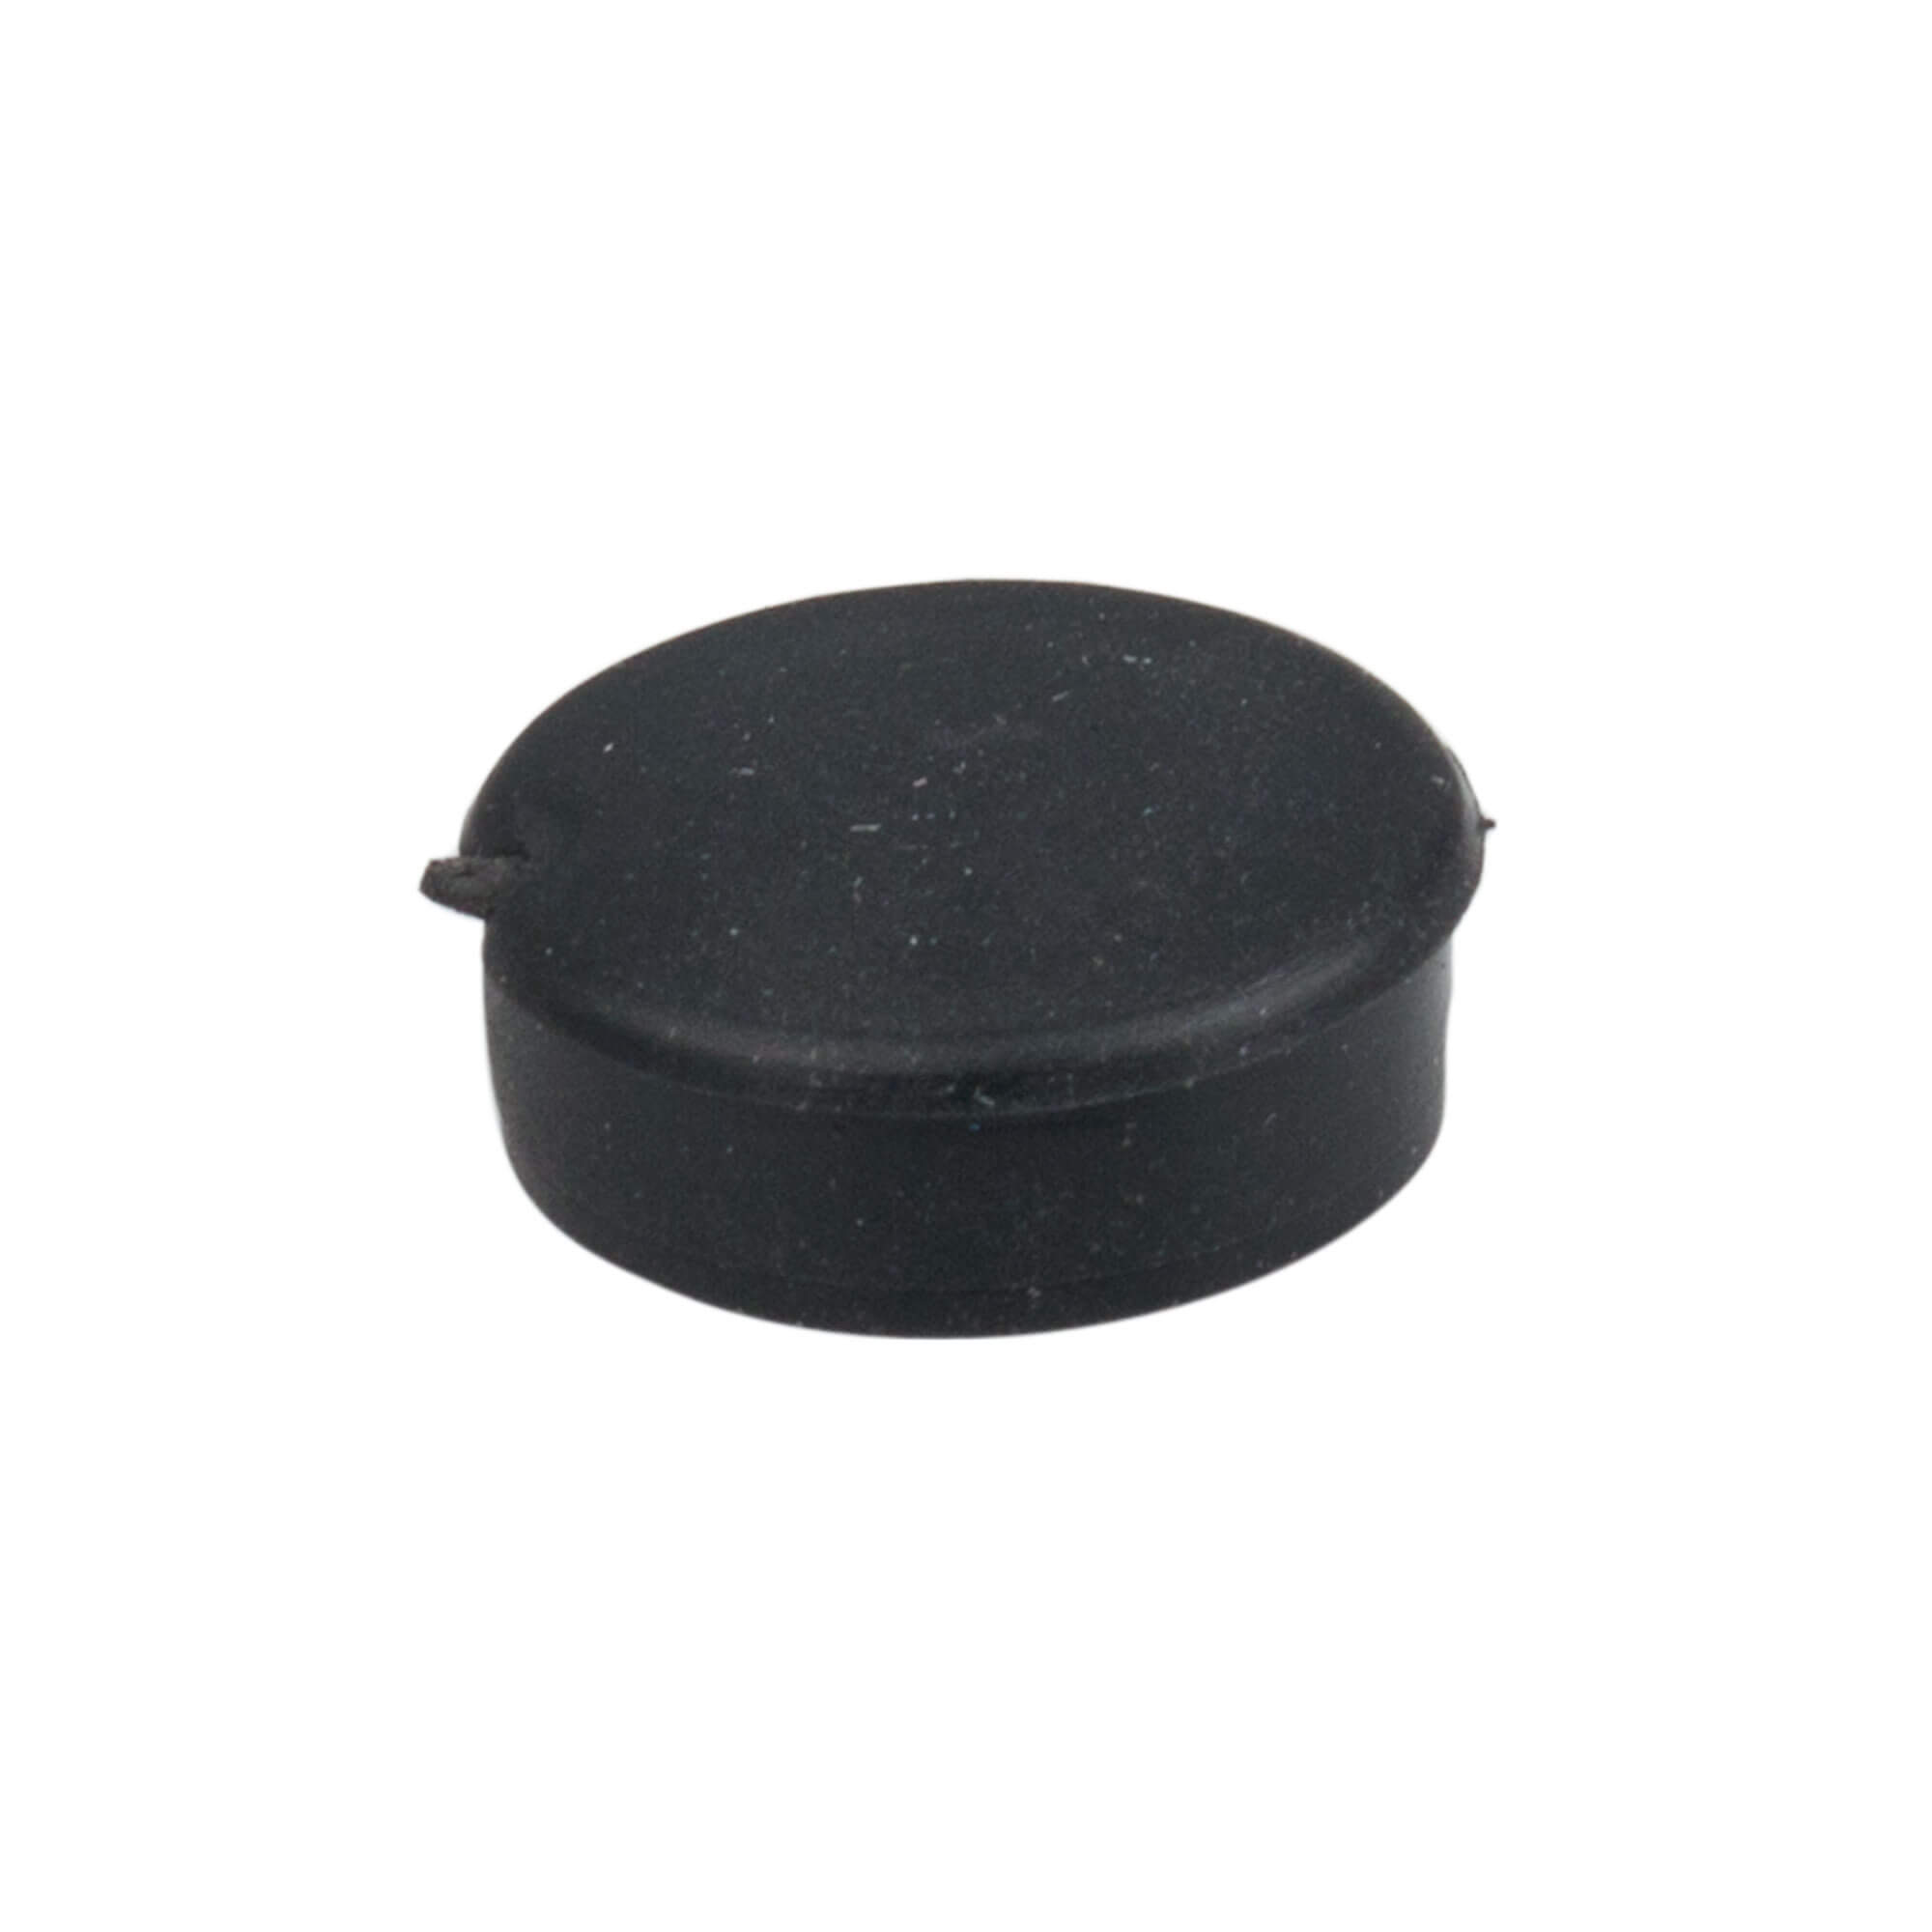 Top Plastic Stopper - spare part for Cancan manual juicer